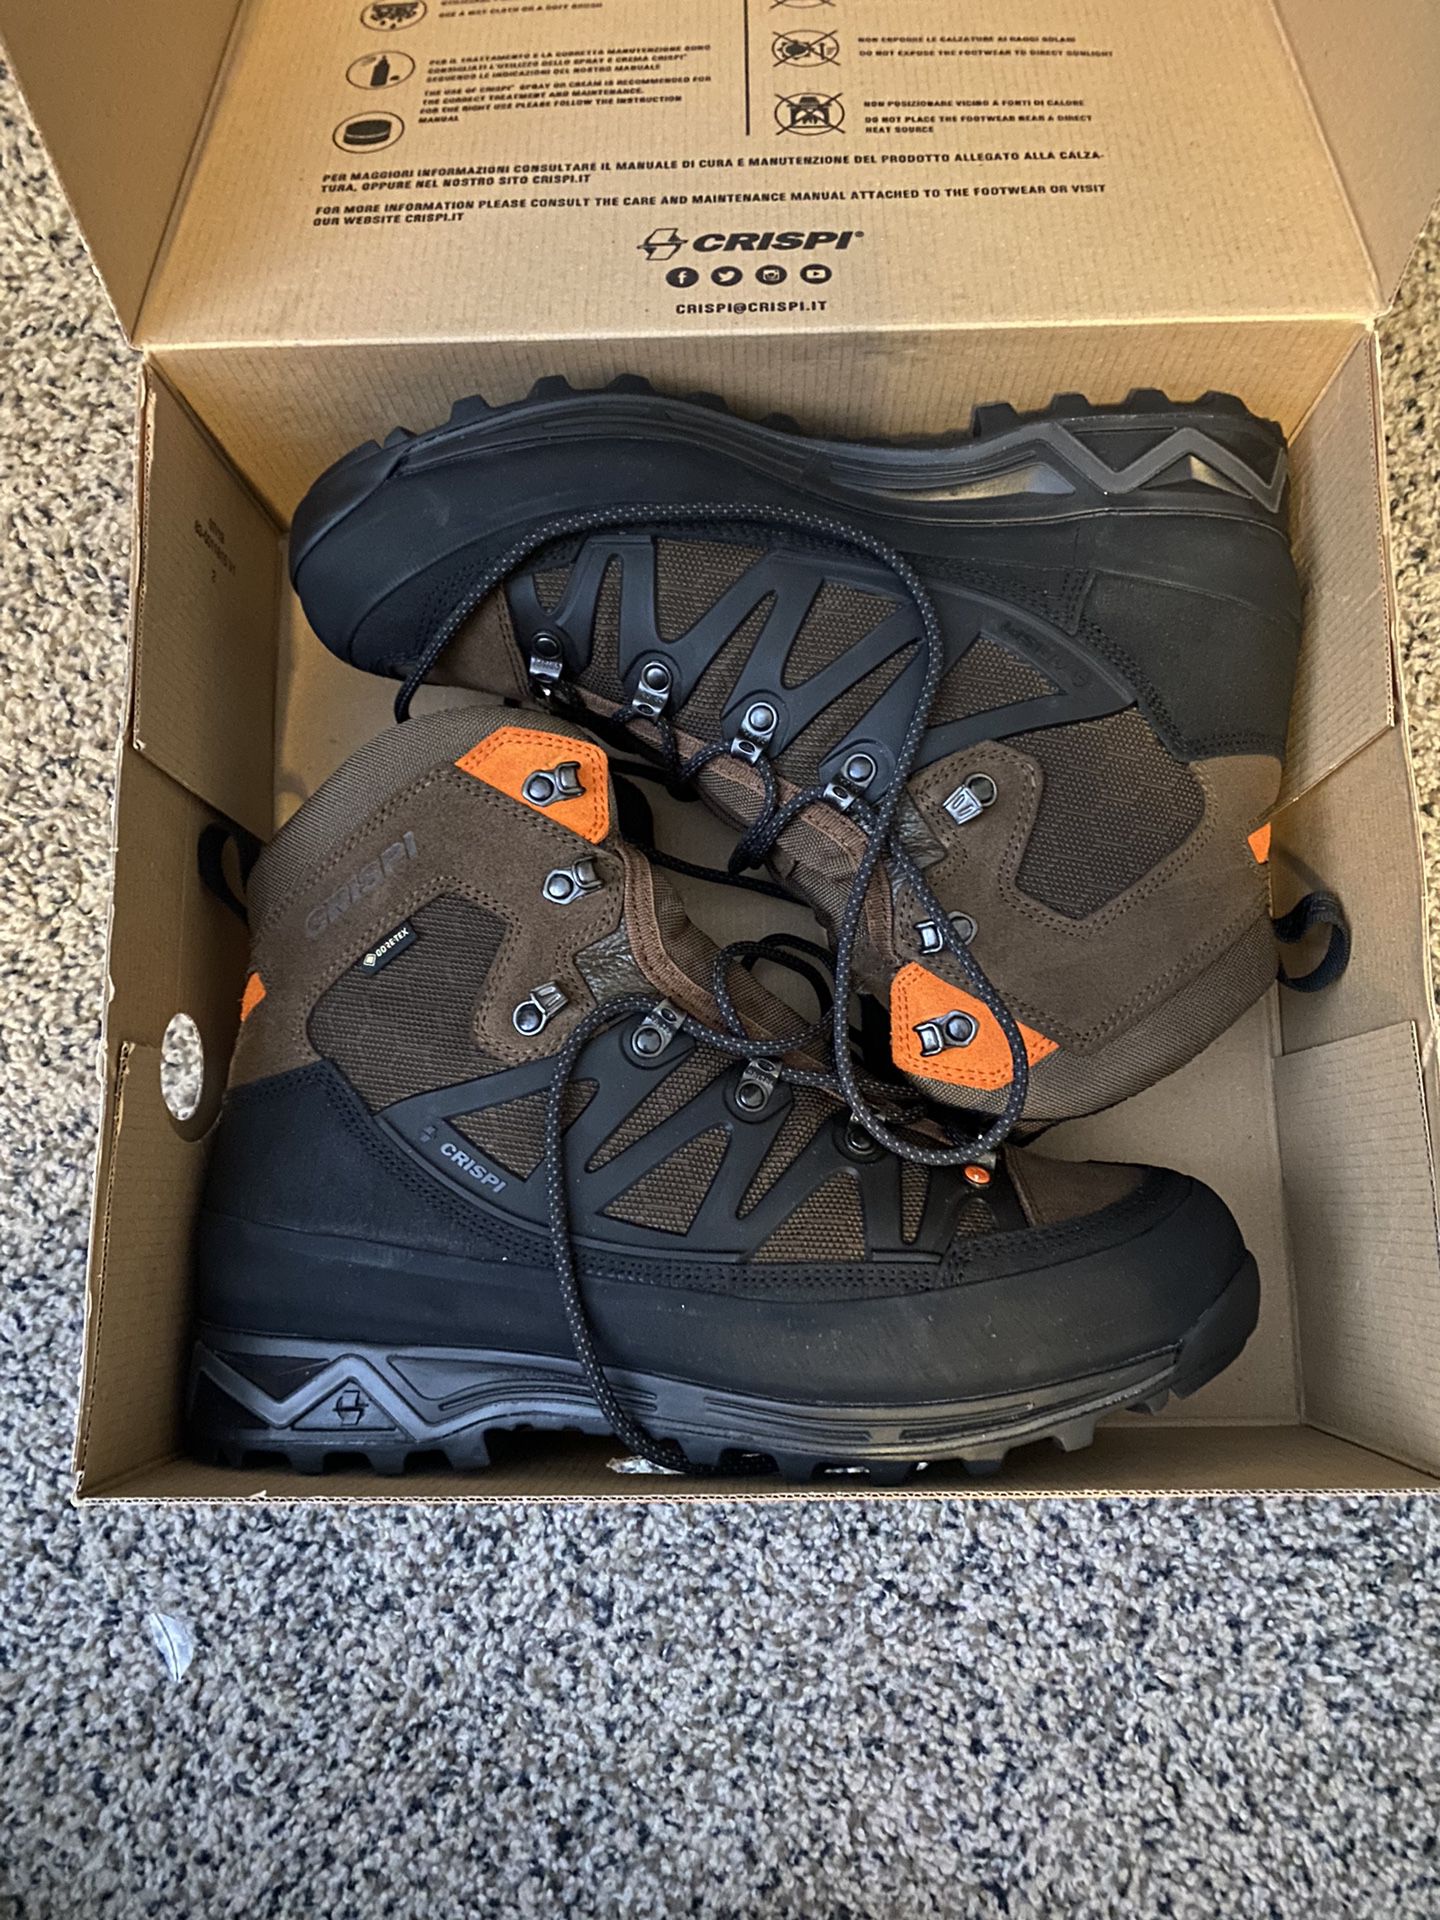 Crispi Wyoming II GTX Boots for Sale in Avondale, AZ - OfferUp